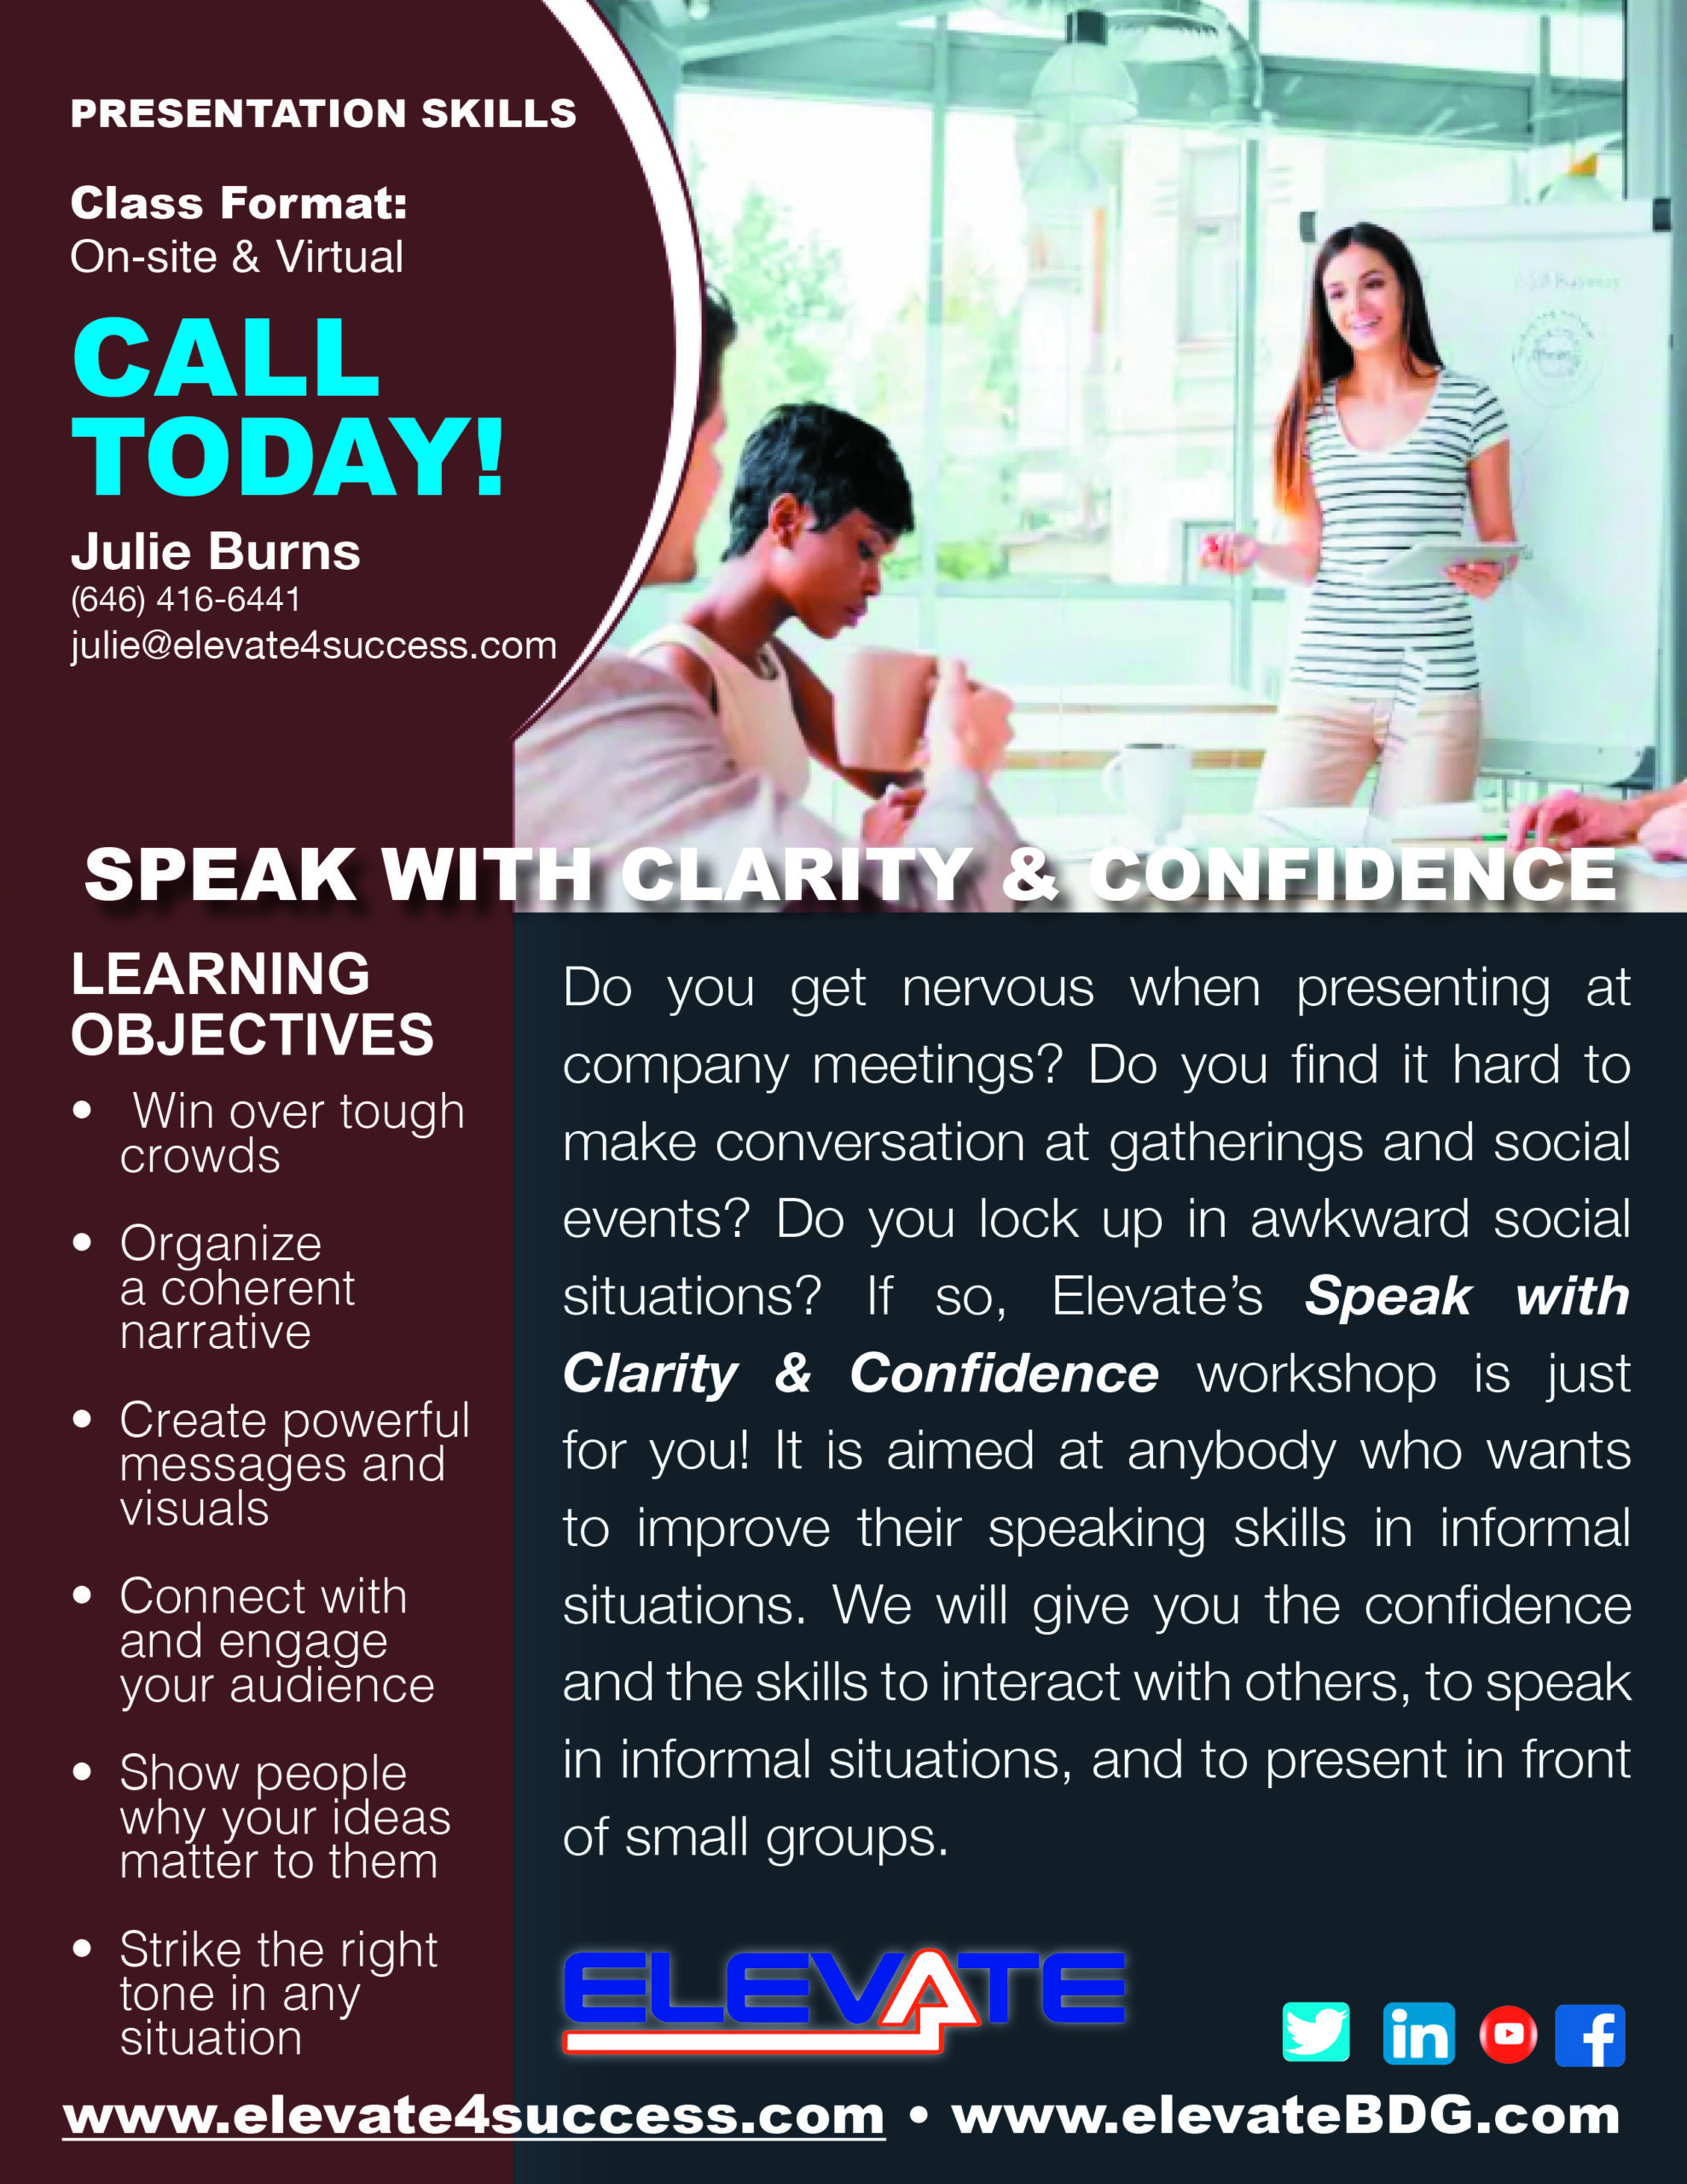 Speak with Clarity and Confidence 1